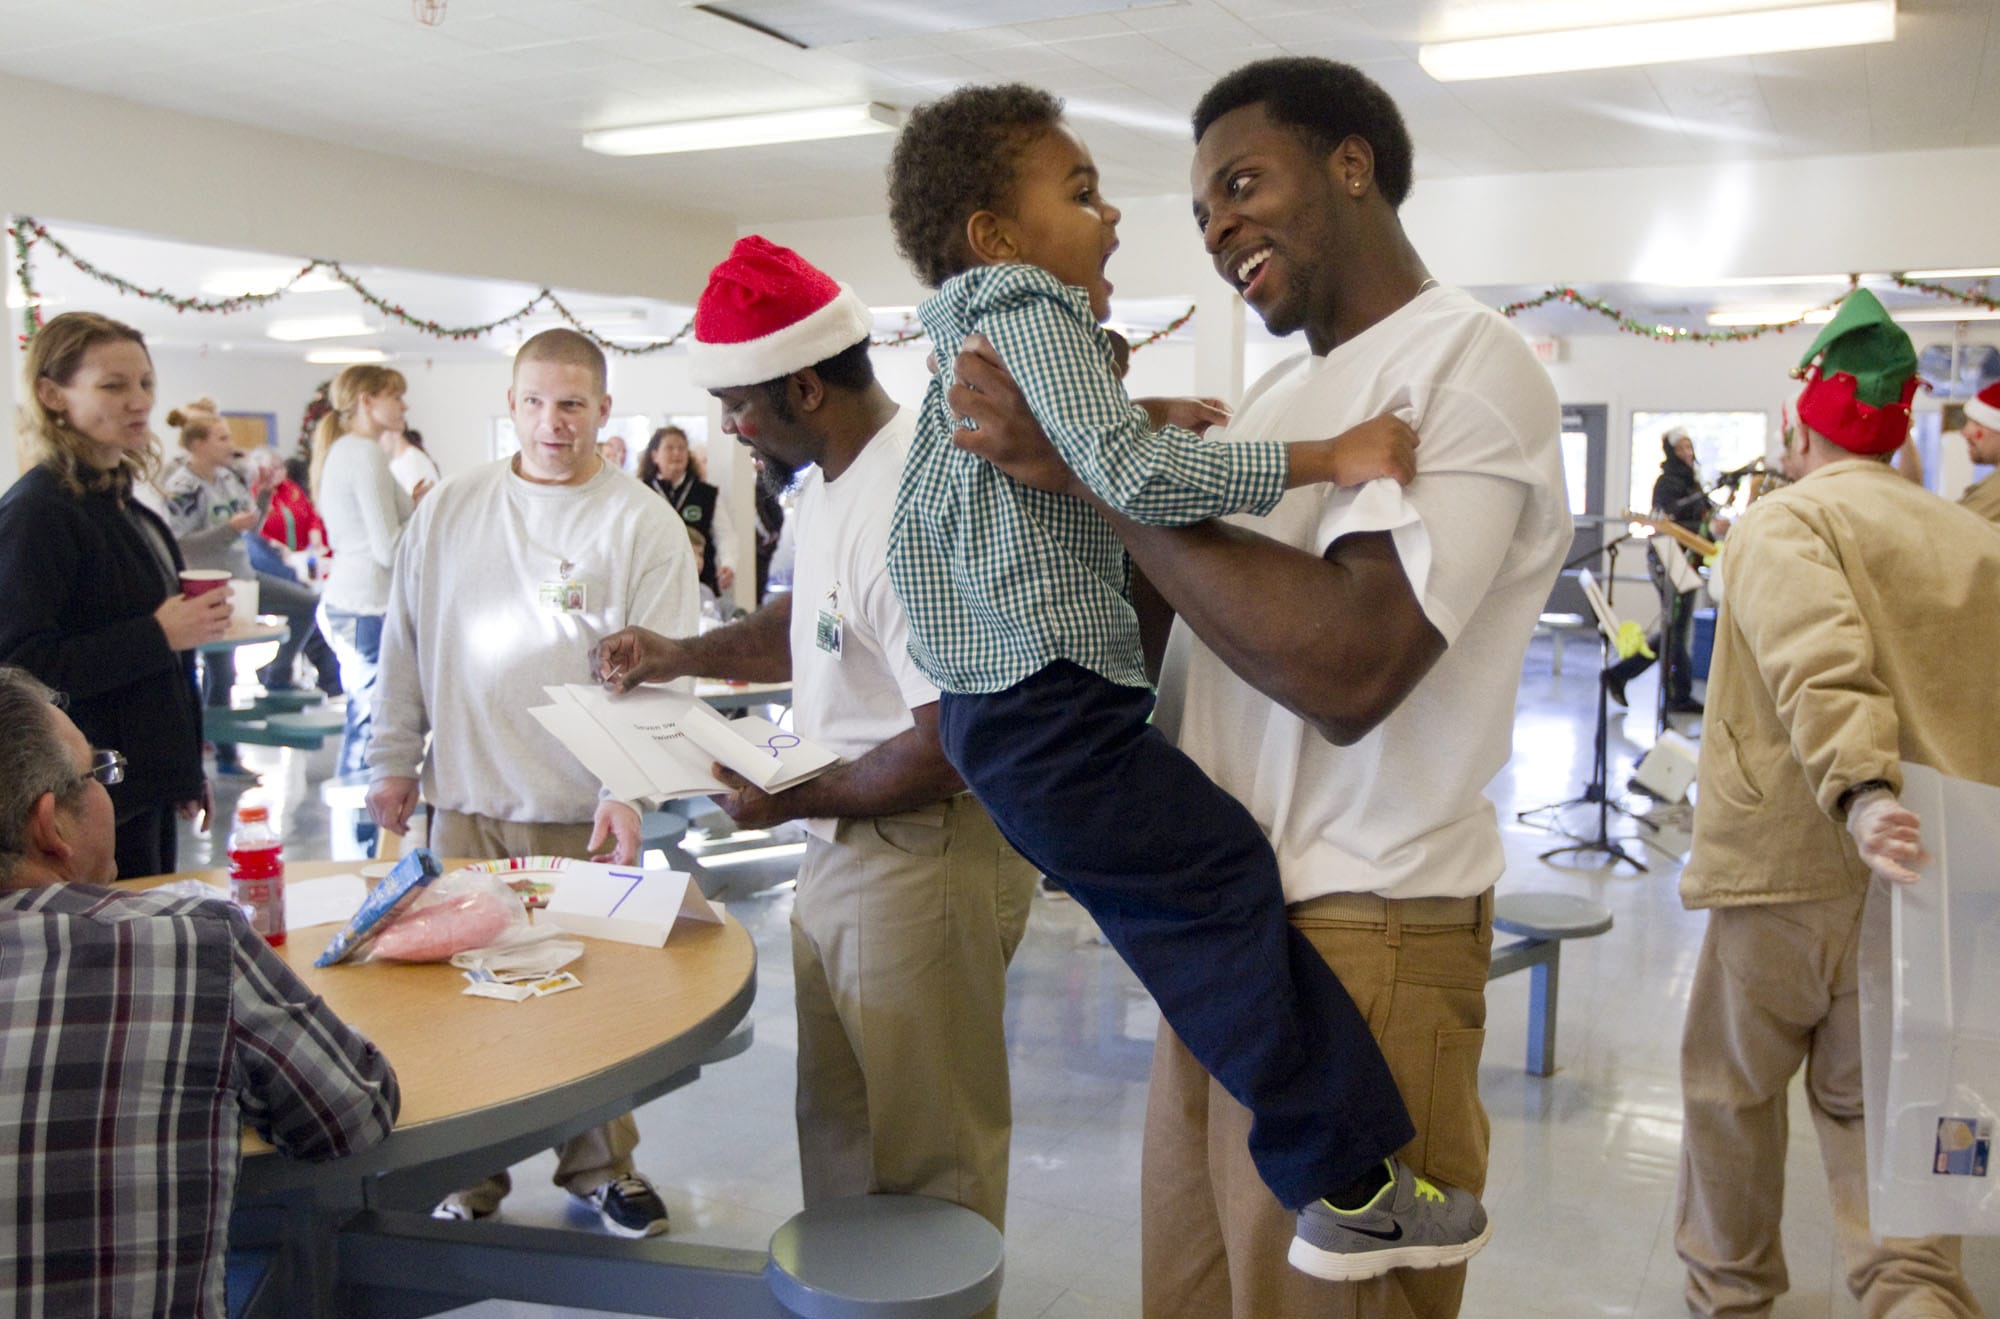 Tyrell Bennett, 23, embraces his son, Tyrell Bennett Jr., 3, Sunday at the Larch Corrections Center in Yacolt. The two hadn't seen each other for 16 months. &quot;If only I knew then what I know now,&quot; he said.